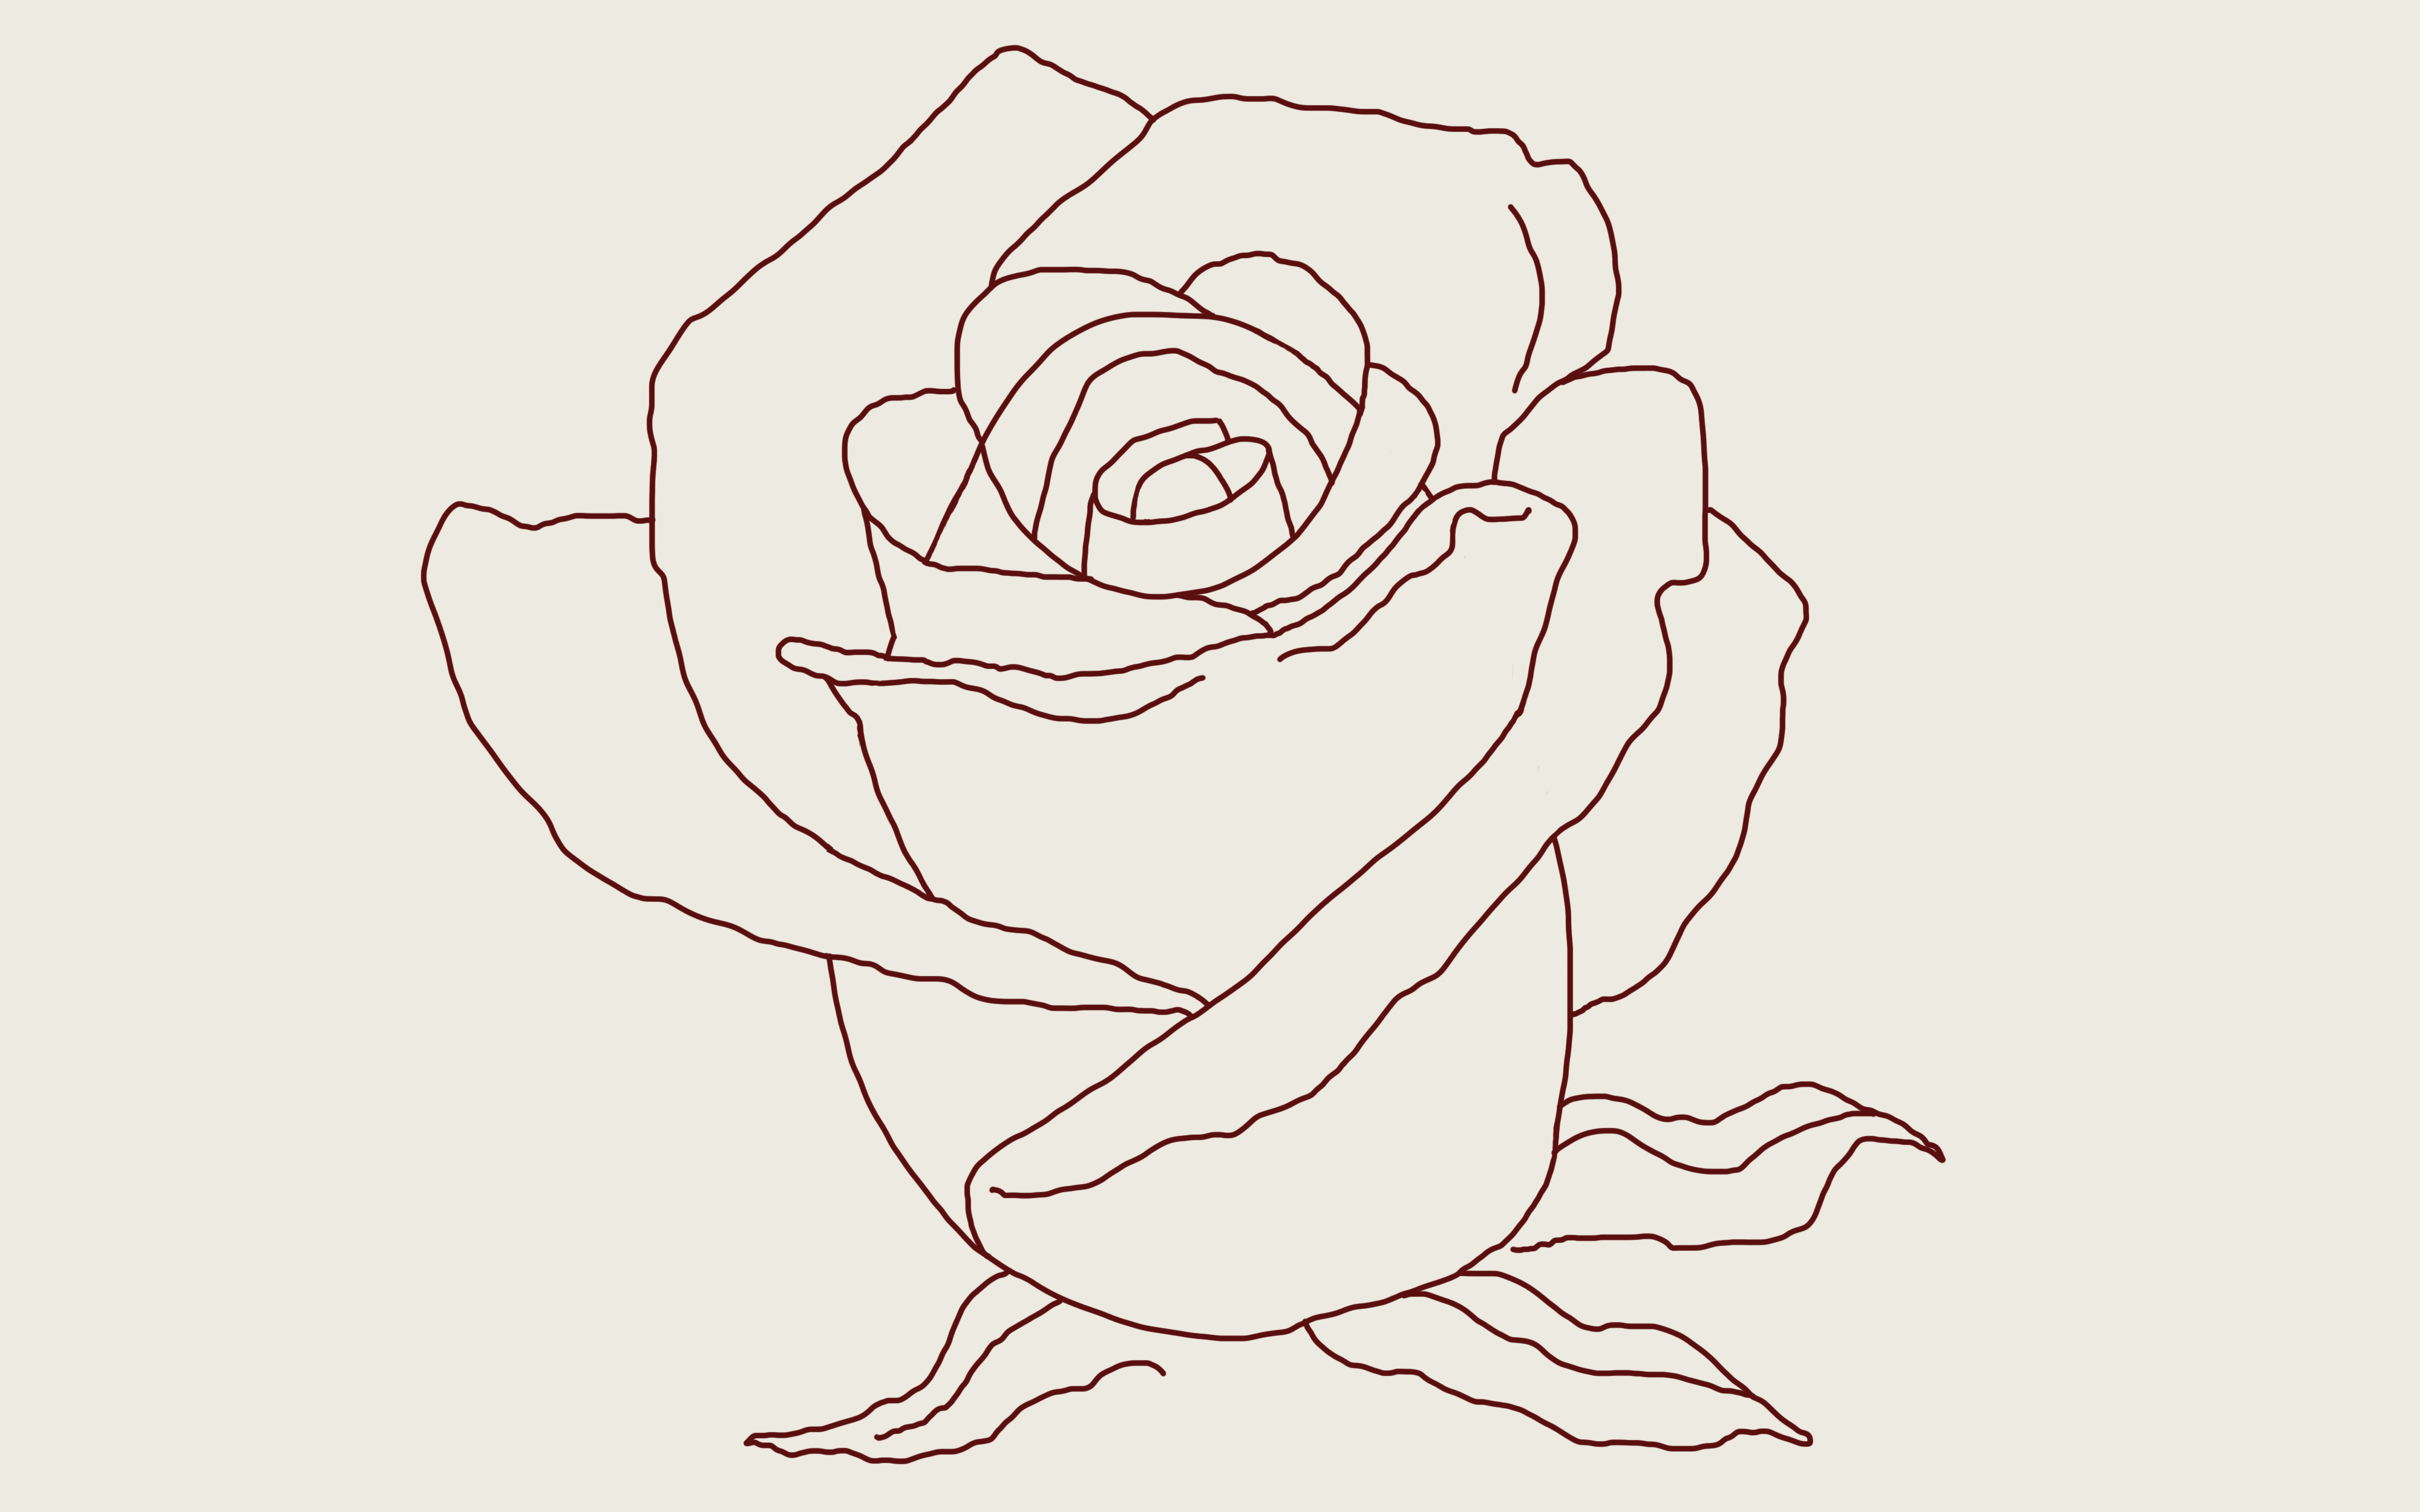 What are the best tips to draw a rose? - Quora